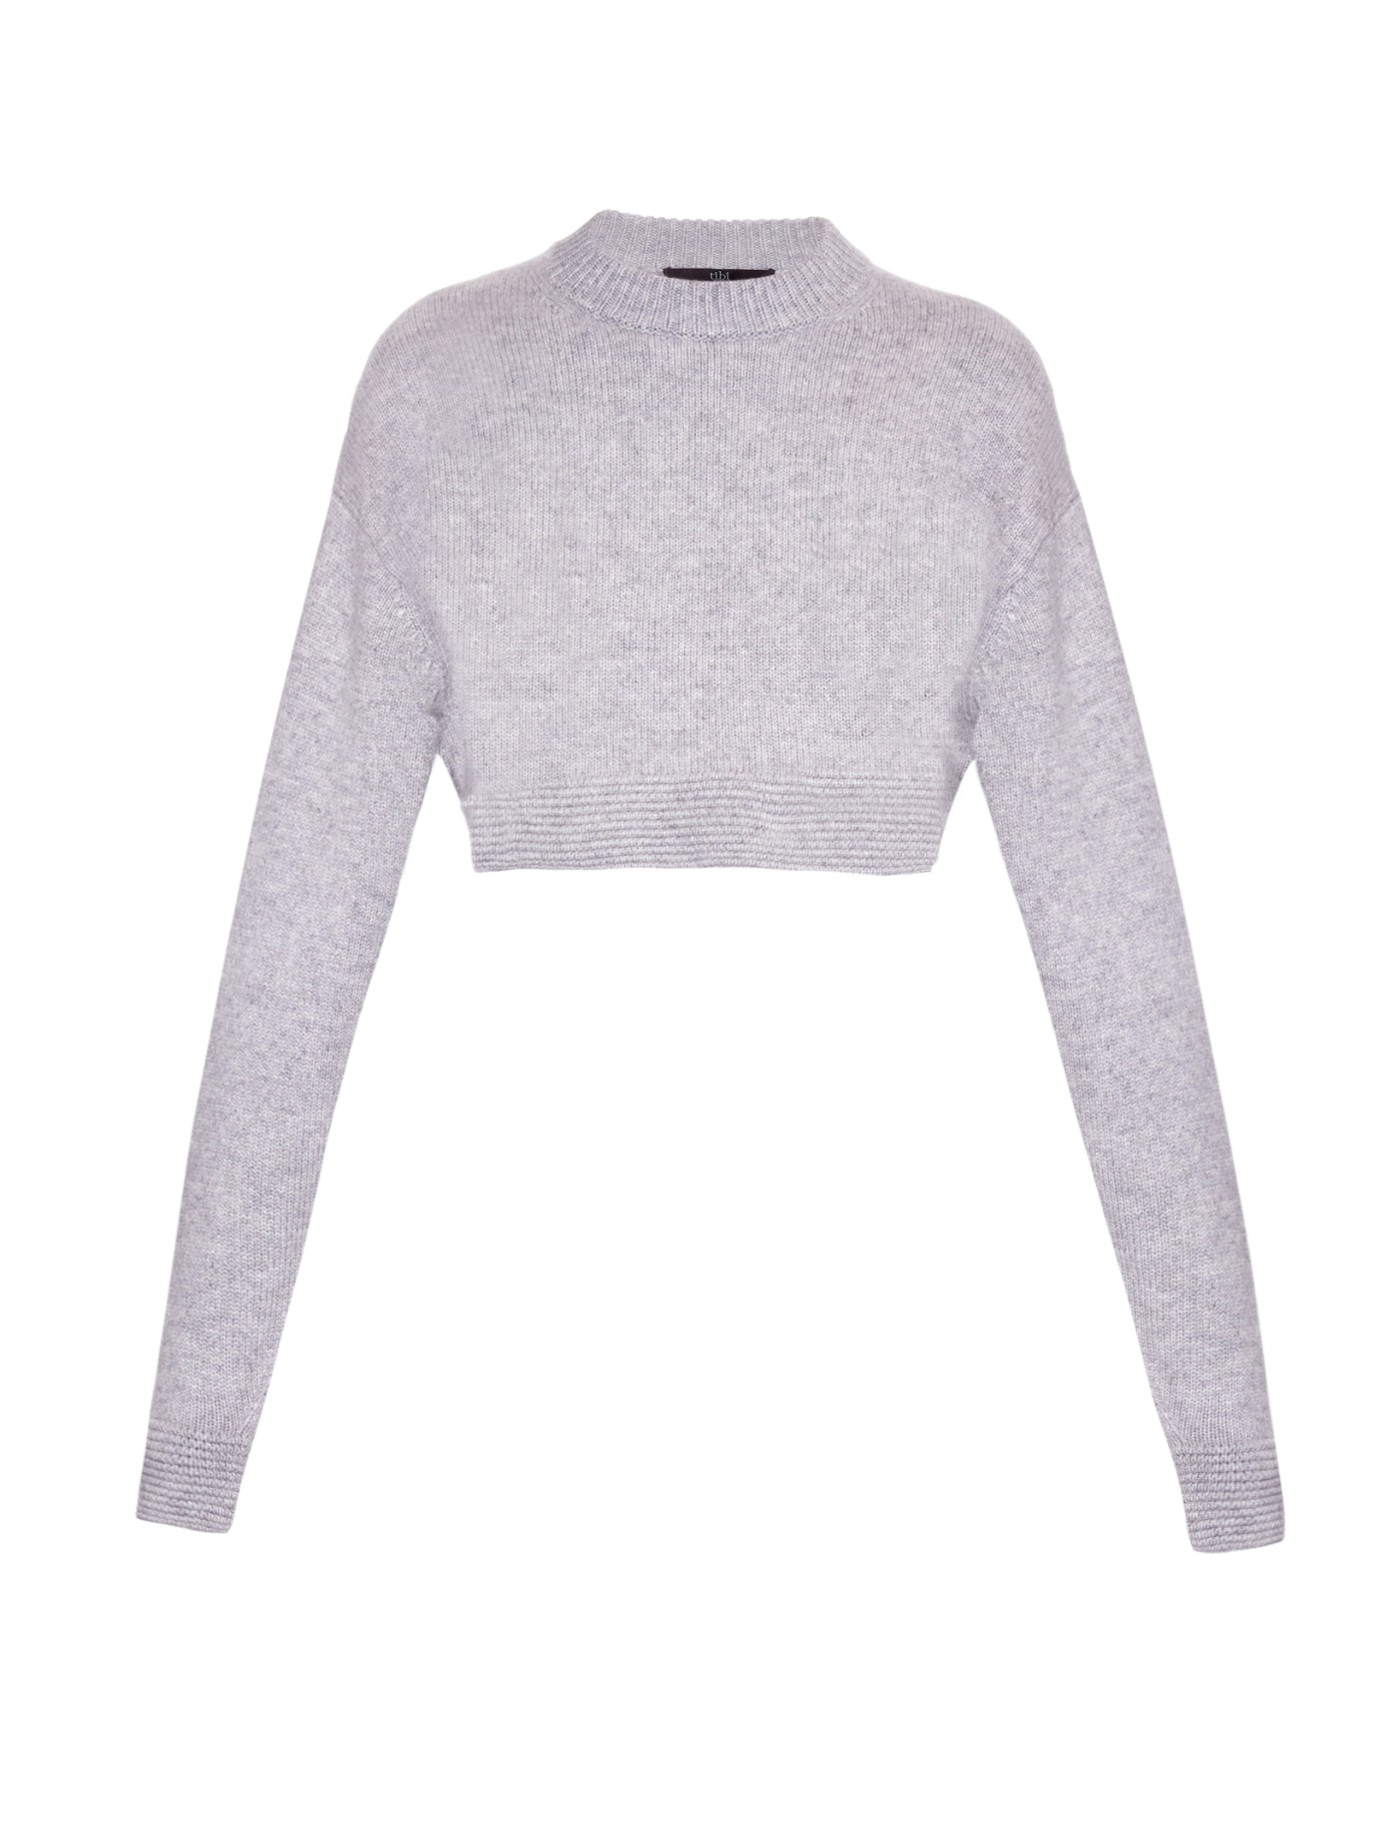 Tibi Cropped Cashmere Sweater in Gray | Lyst